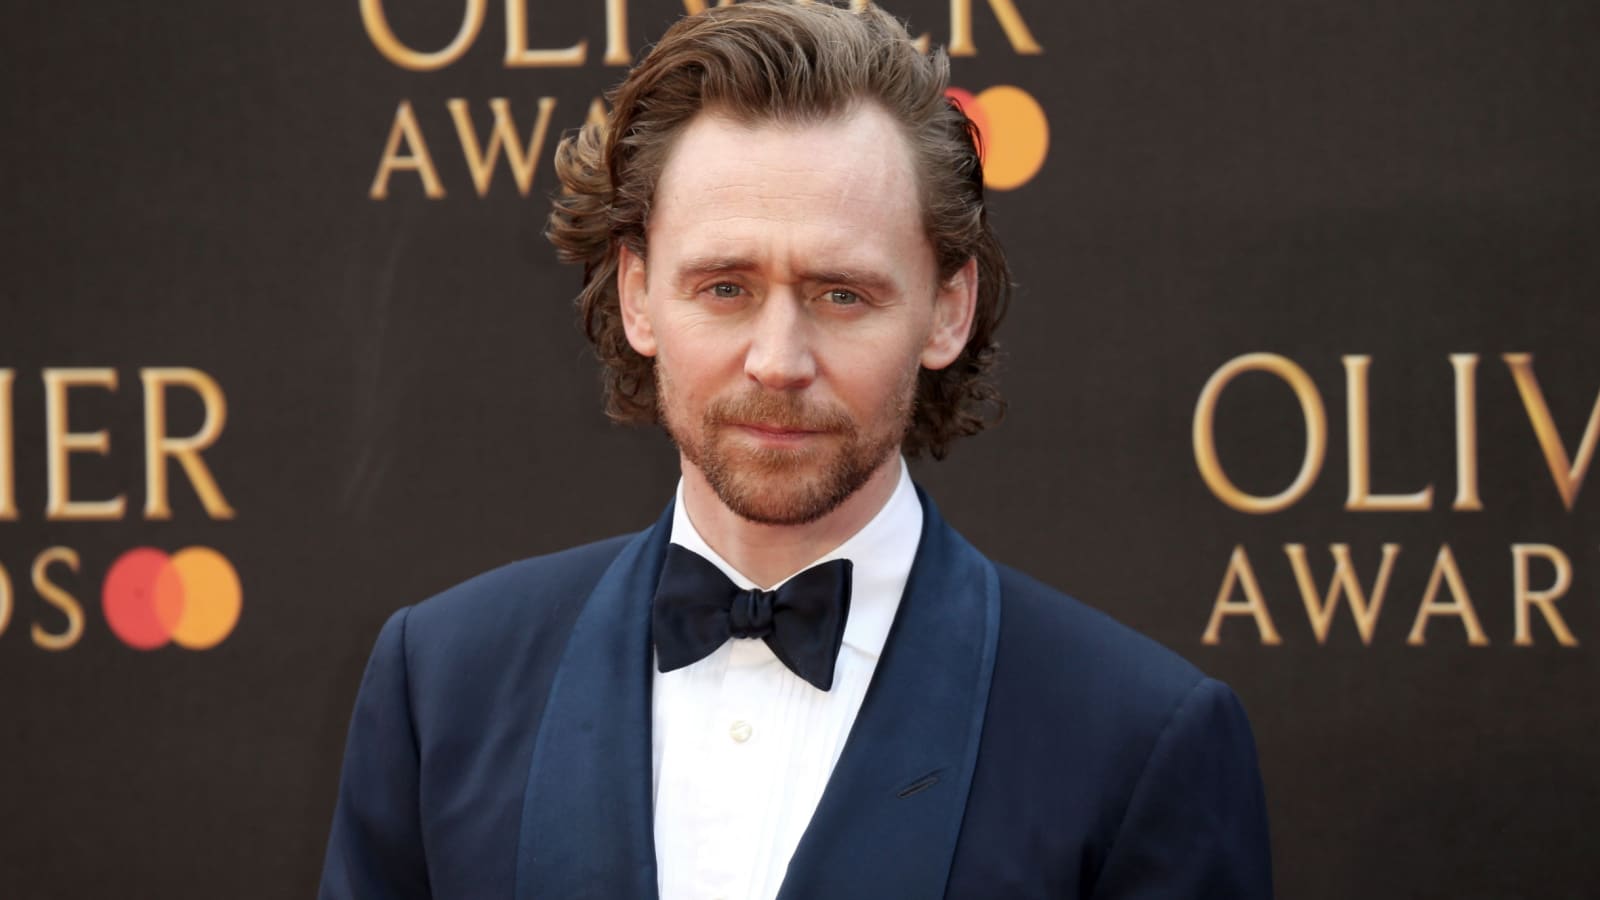 London, United Kingdom - April 7, 2019: Tom Hiddleston attends The Olivier Awards at the Royal Albert Hall in London, England.